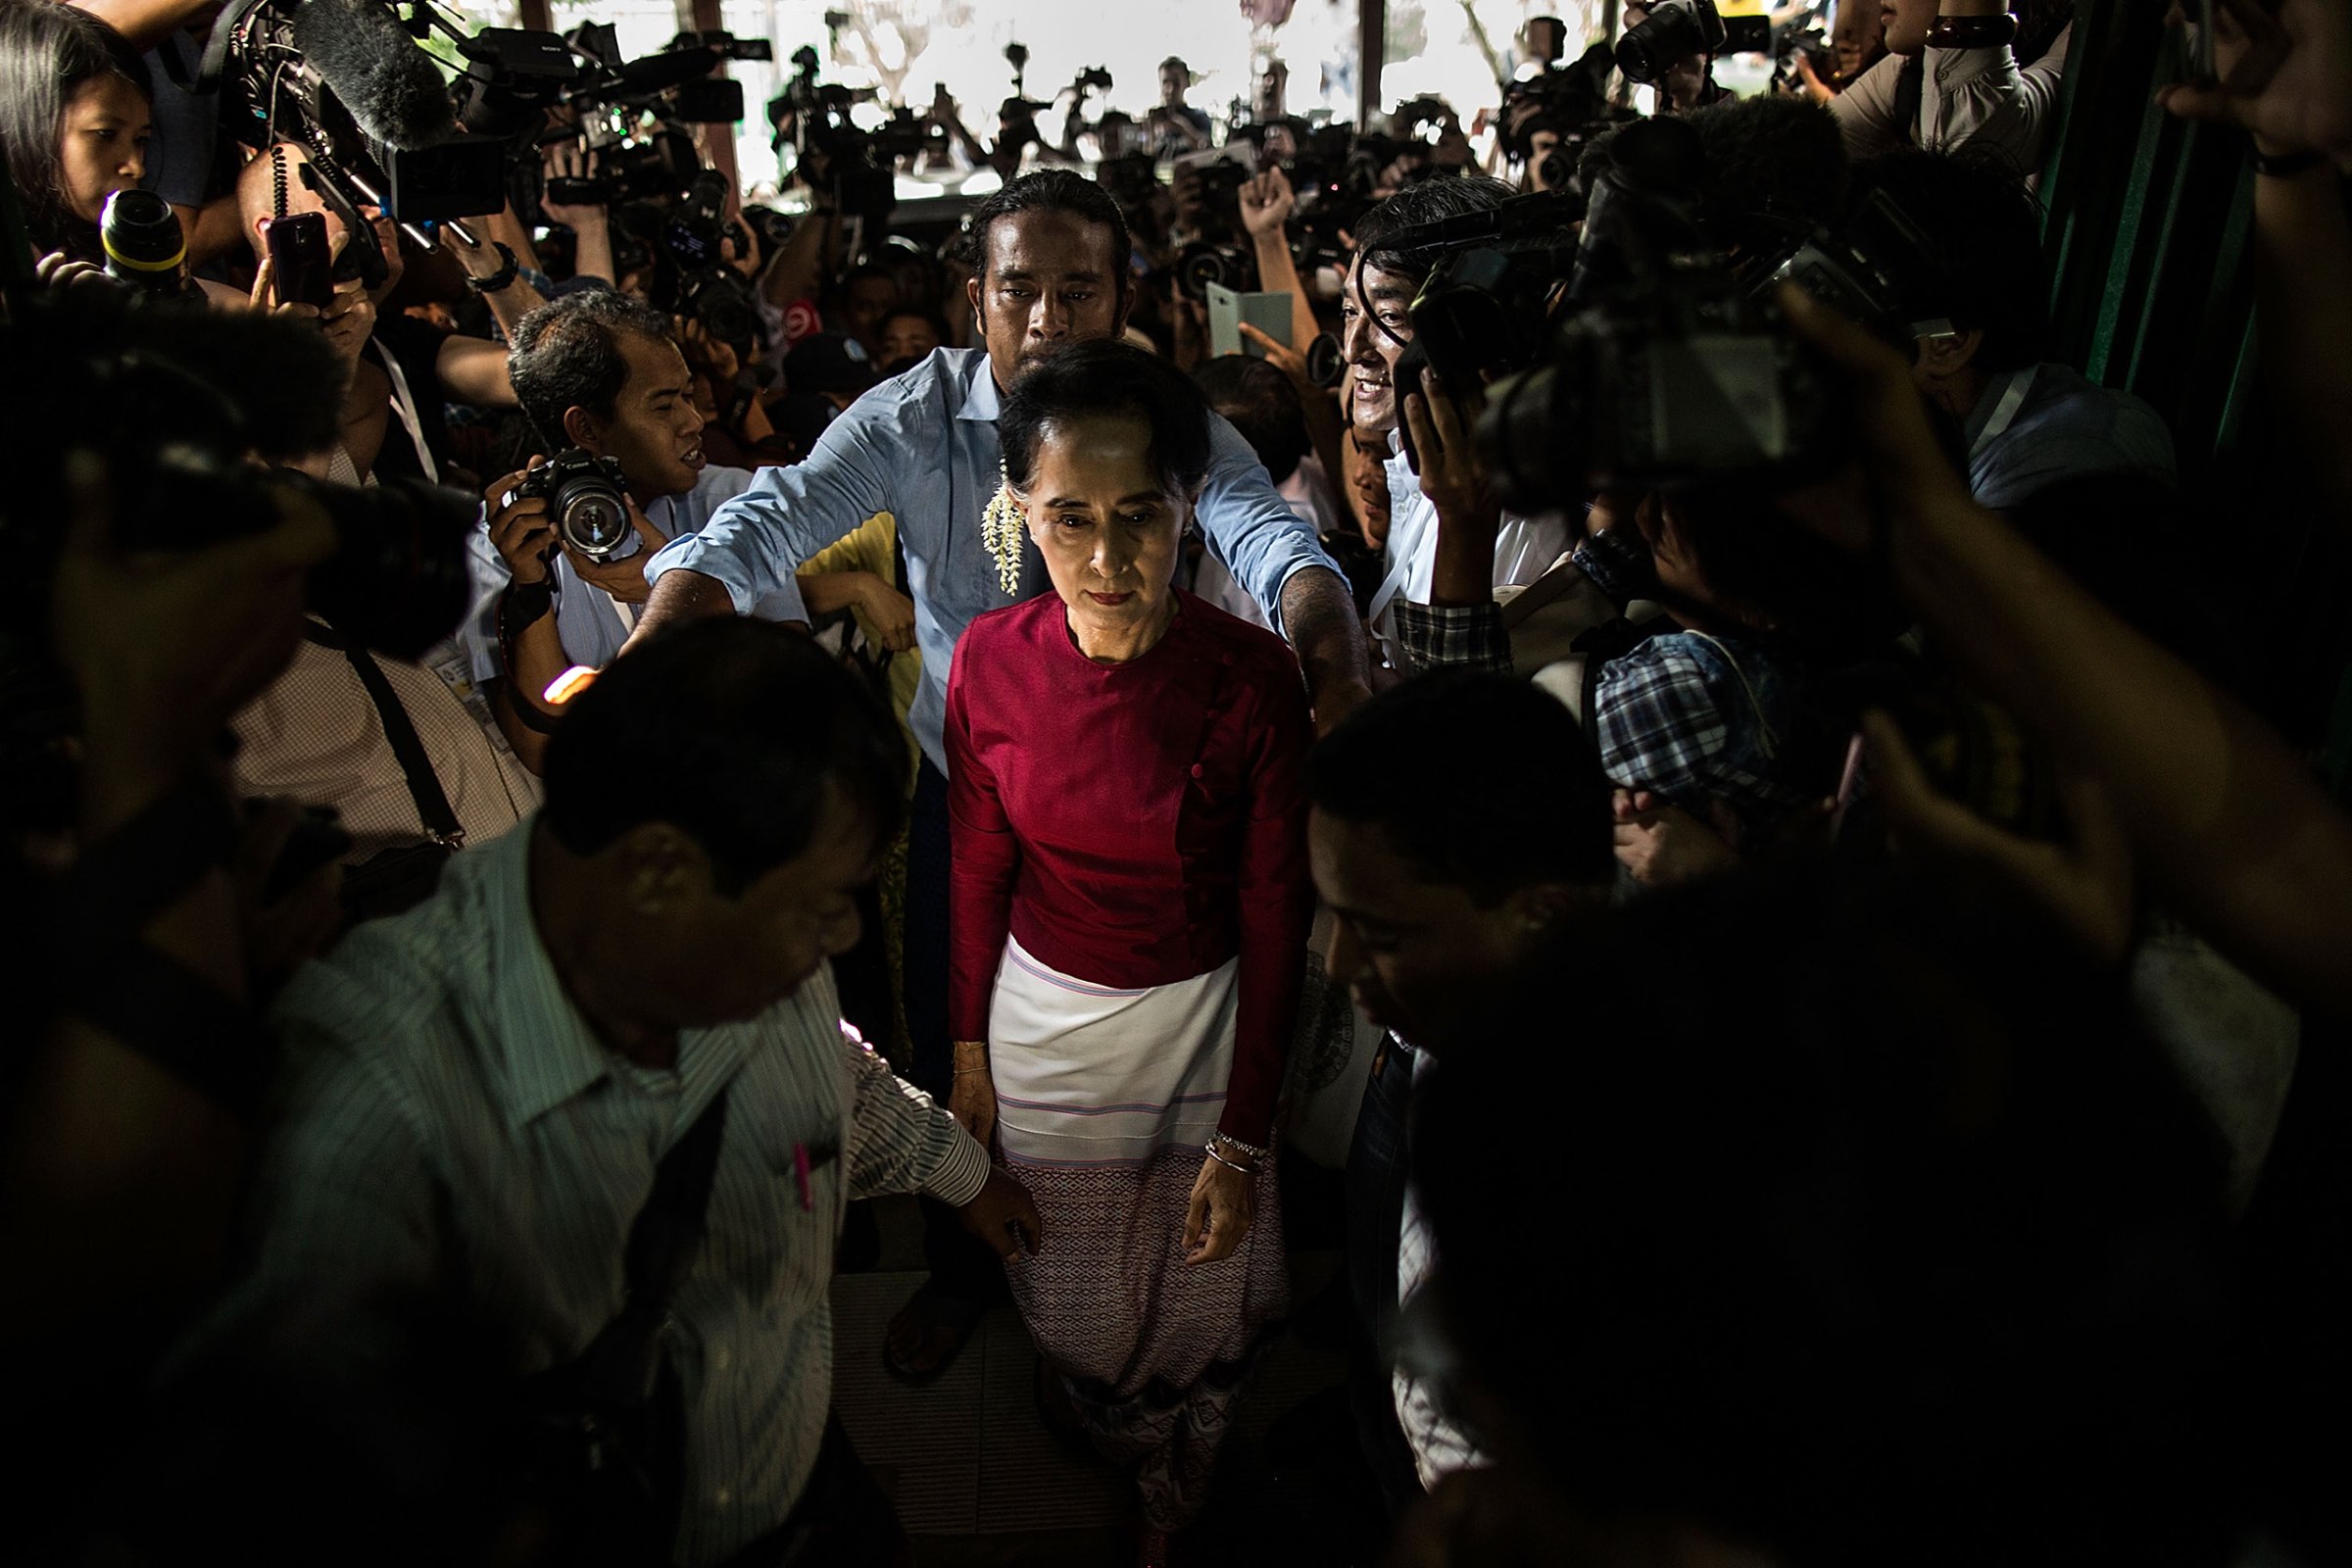 Aung San Suu Kyi arrives at the polling station to cast her vote during Myanmar's first free election a quarter-century in Yangon on Nov. 8, 2015.